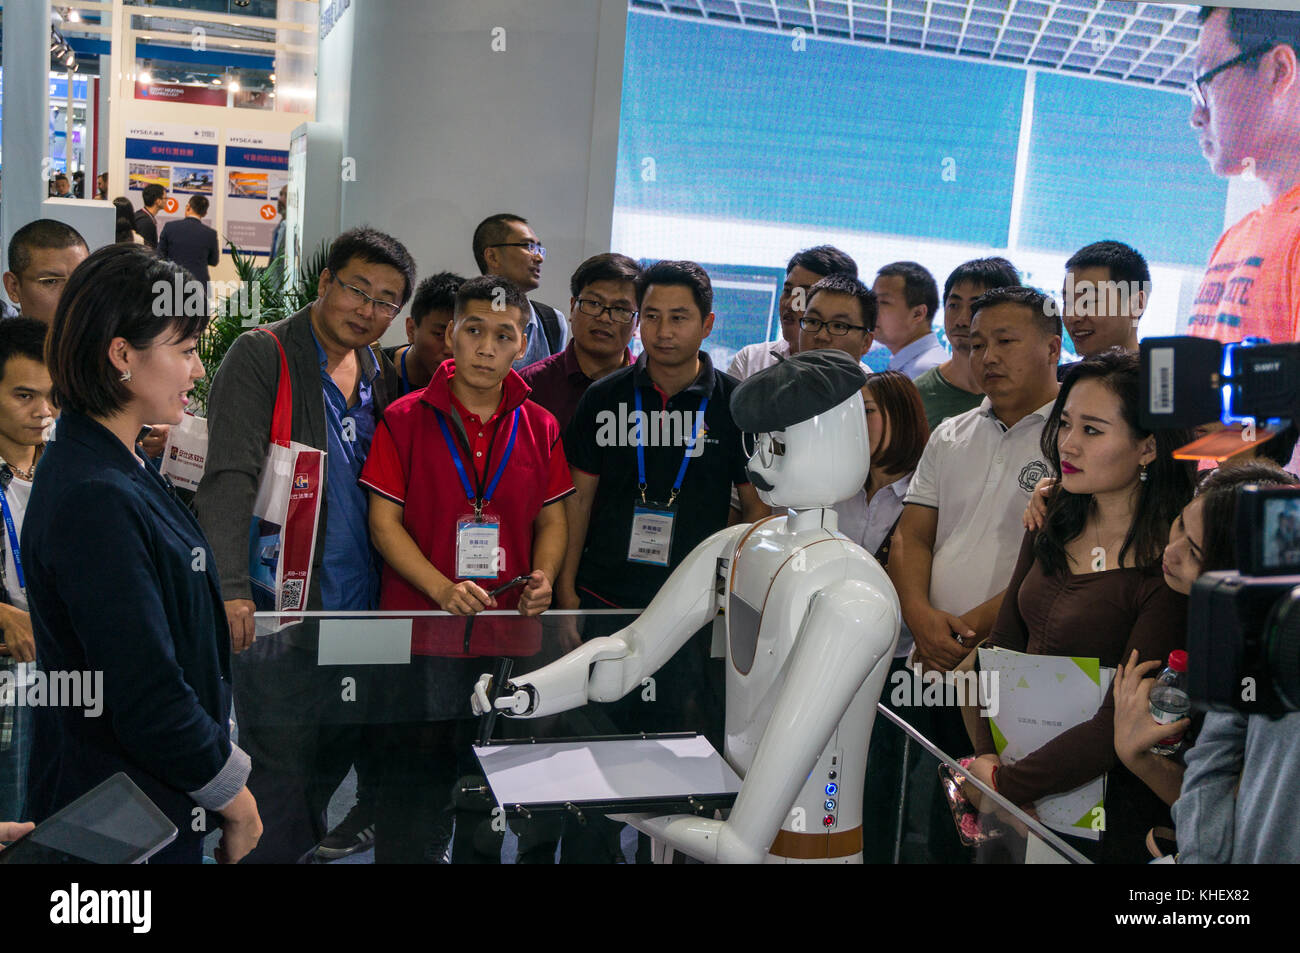 Shenzhen, China. 16th Nov, 2017. Intelligent AI drawing robot looking at before sketching her picture through artificial intelligence at China hi-tech fair in Shenzhen, known as 'Silicon Valley of China', Shenzhen, China. Credit: RaymondAsiaPhotography/Alamy Live News Stock Photo